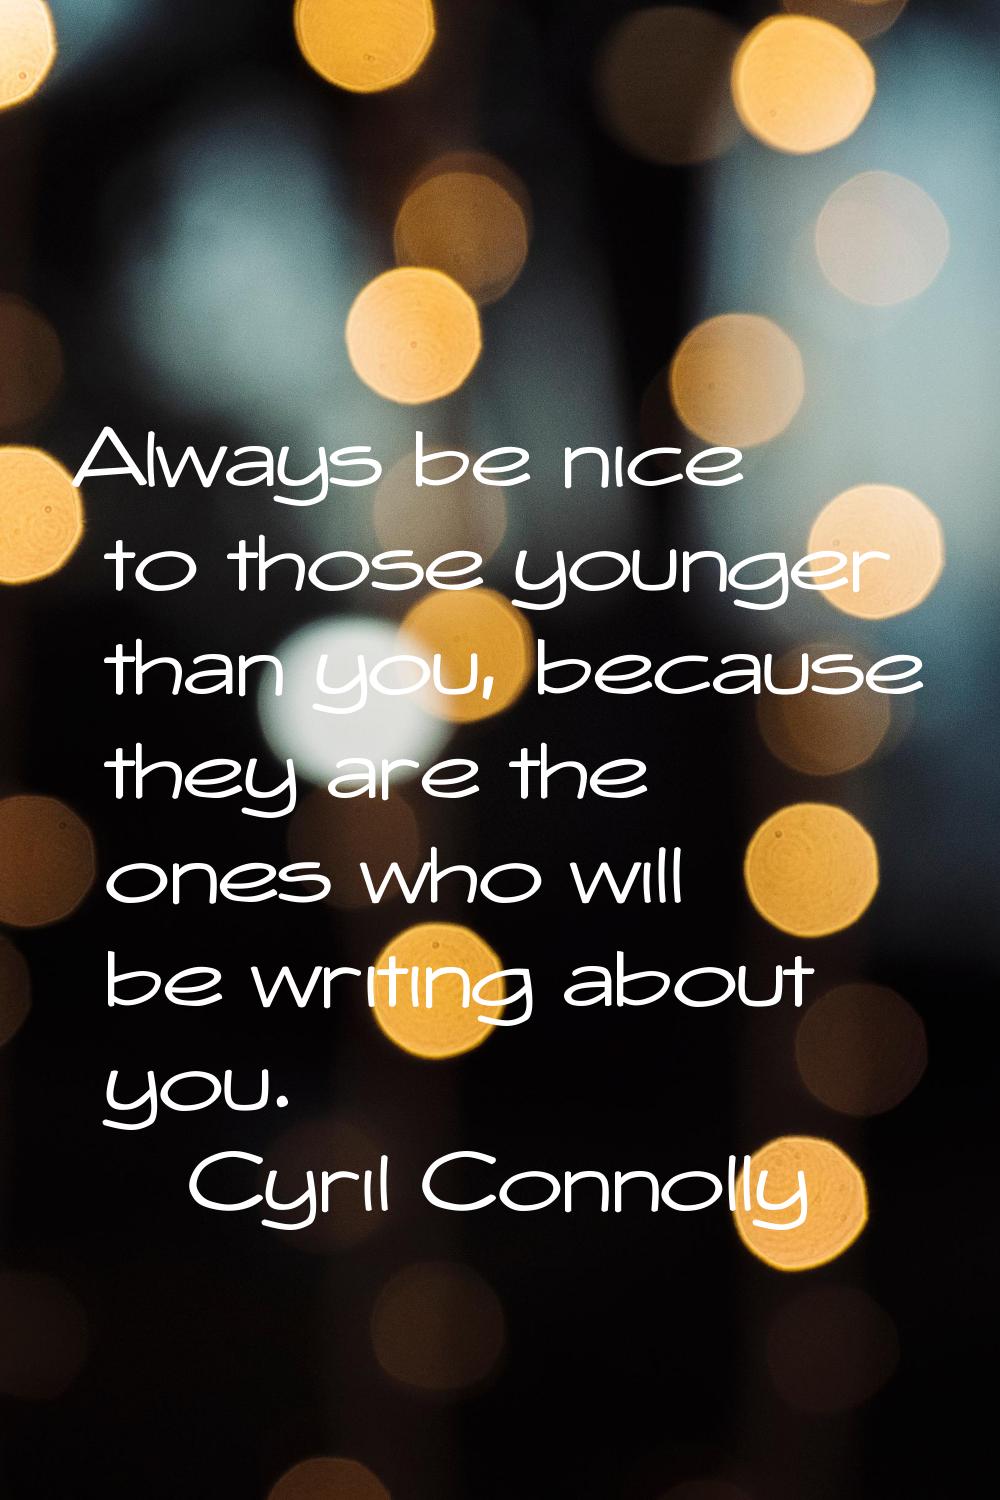 Always be nice to those younger than you, because they are the ones who will be writing about you.